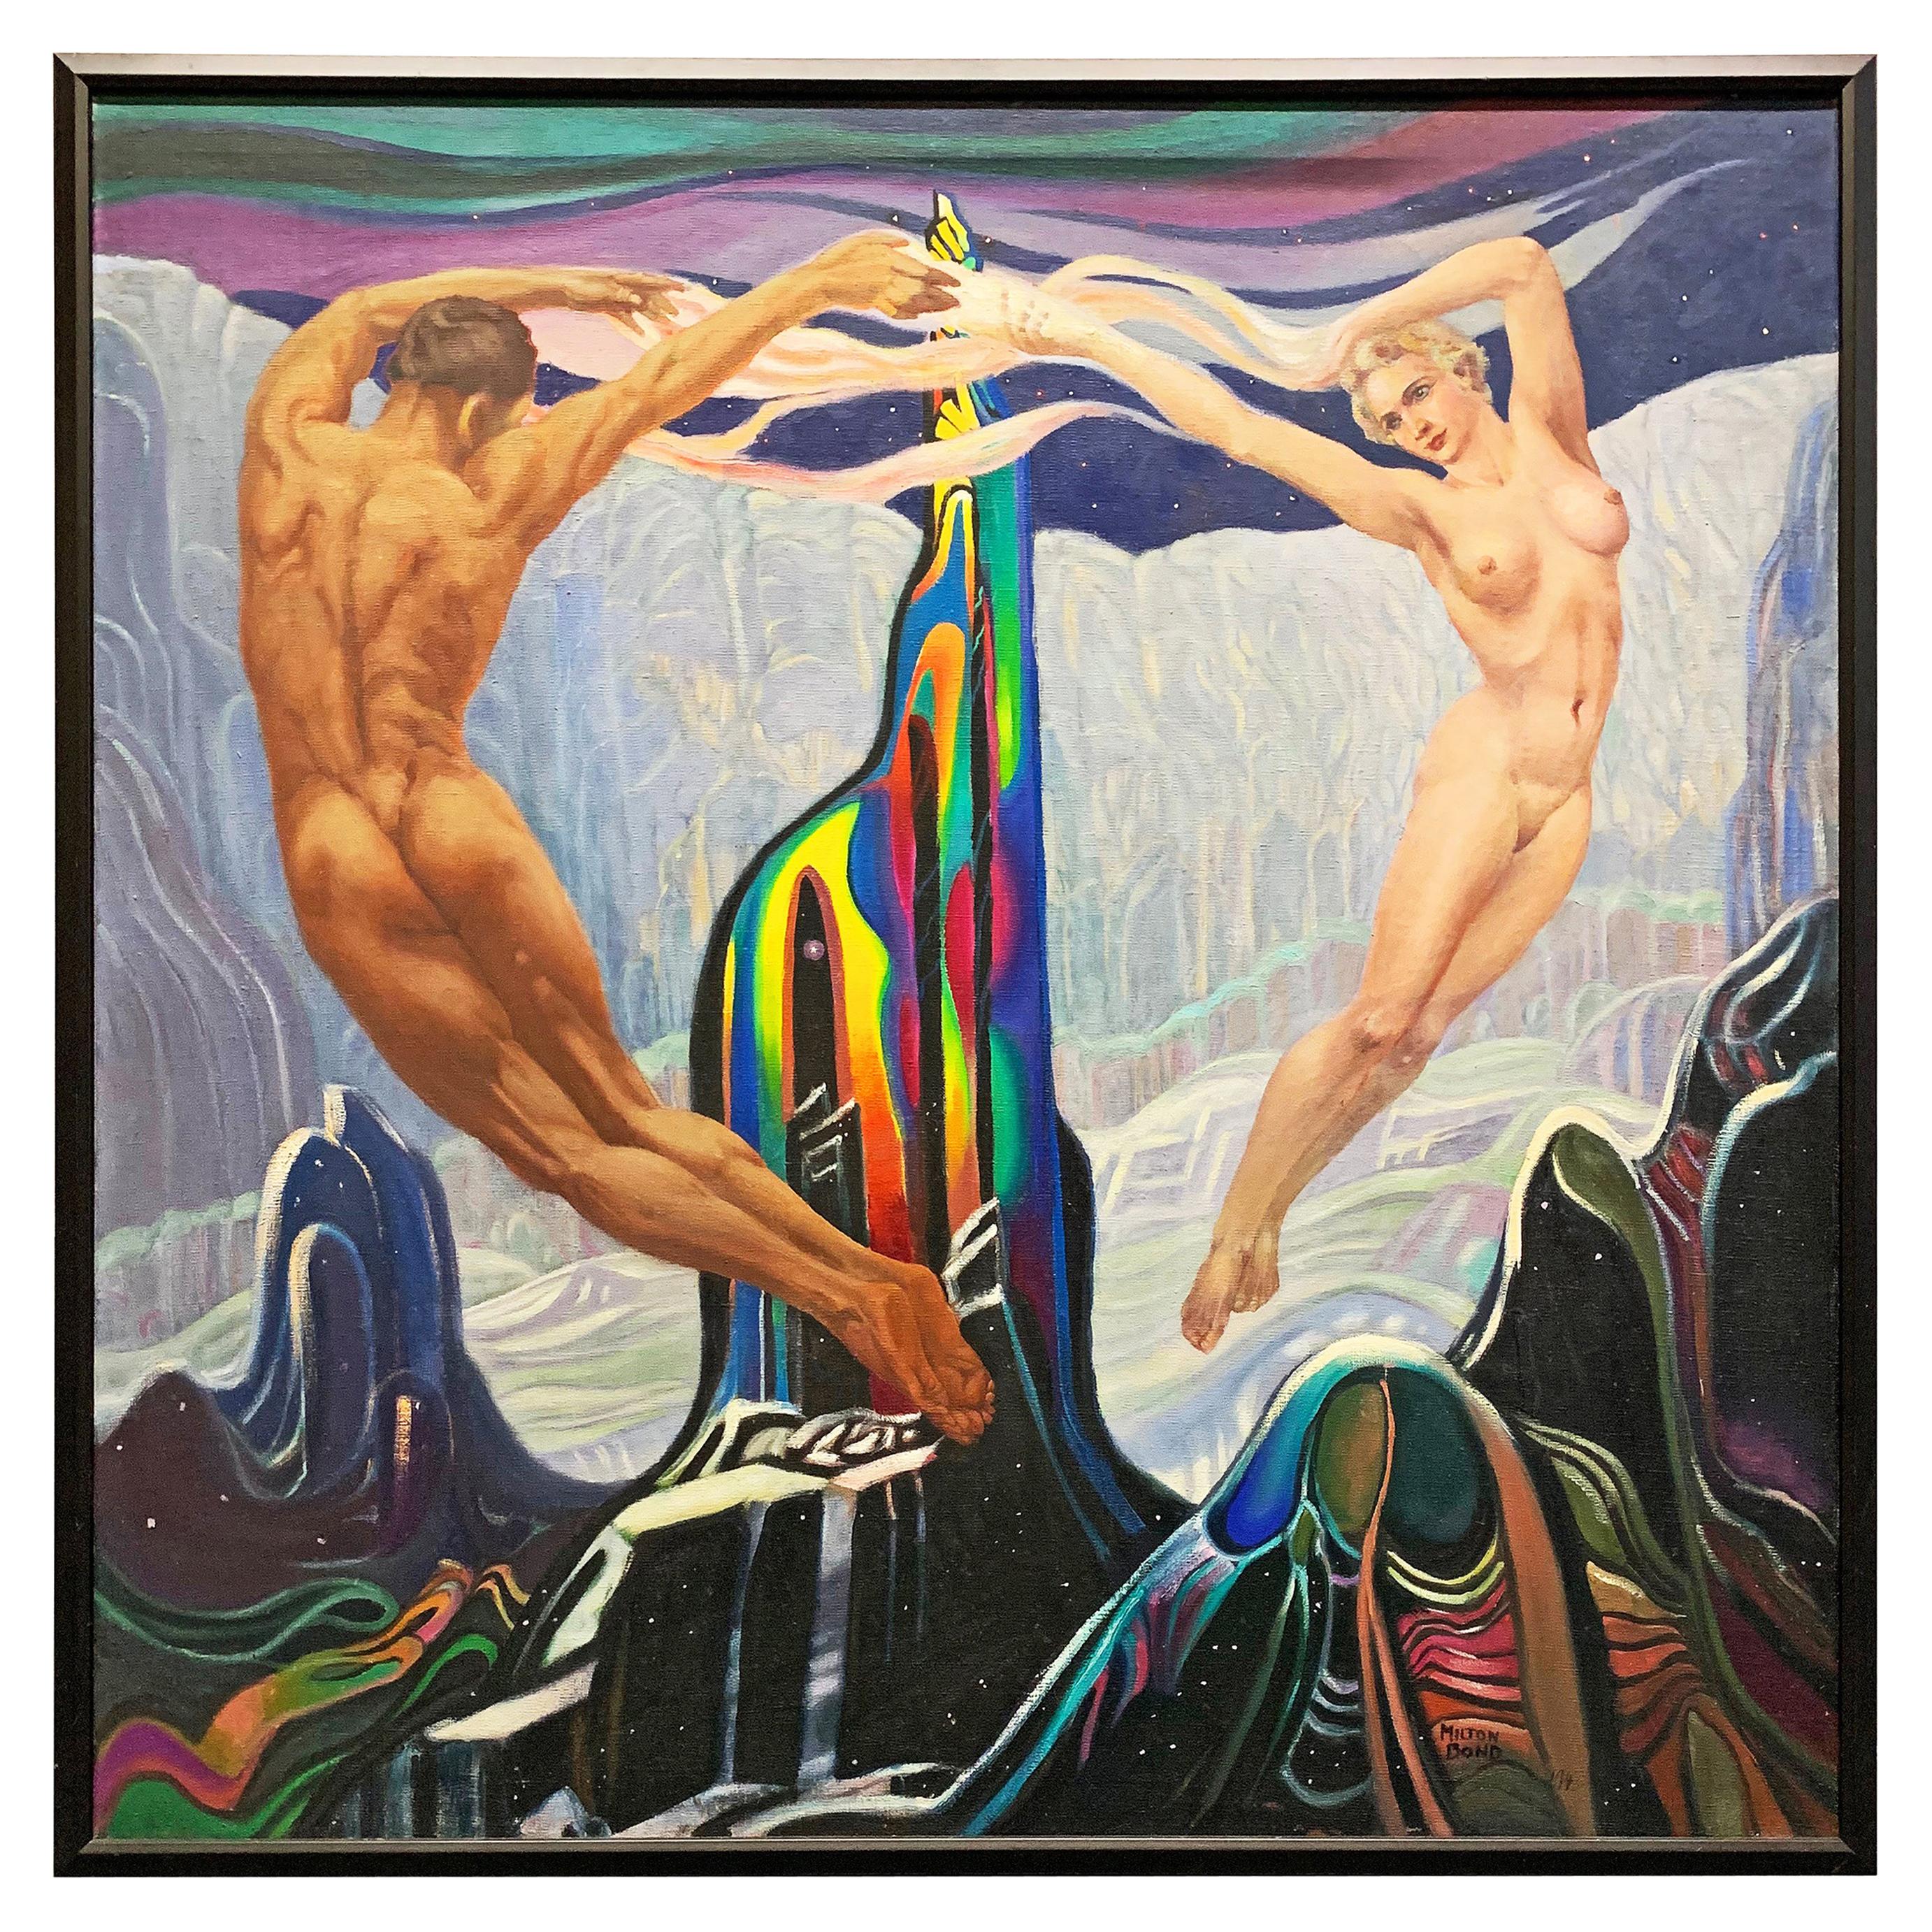 "Dance Around Crystal Mountain," Remarkable Art Deco Painting with Nudes, 1945